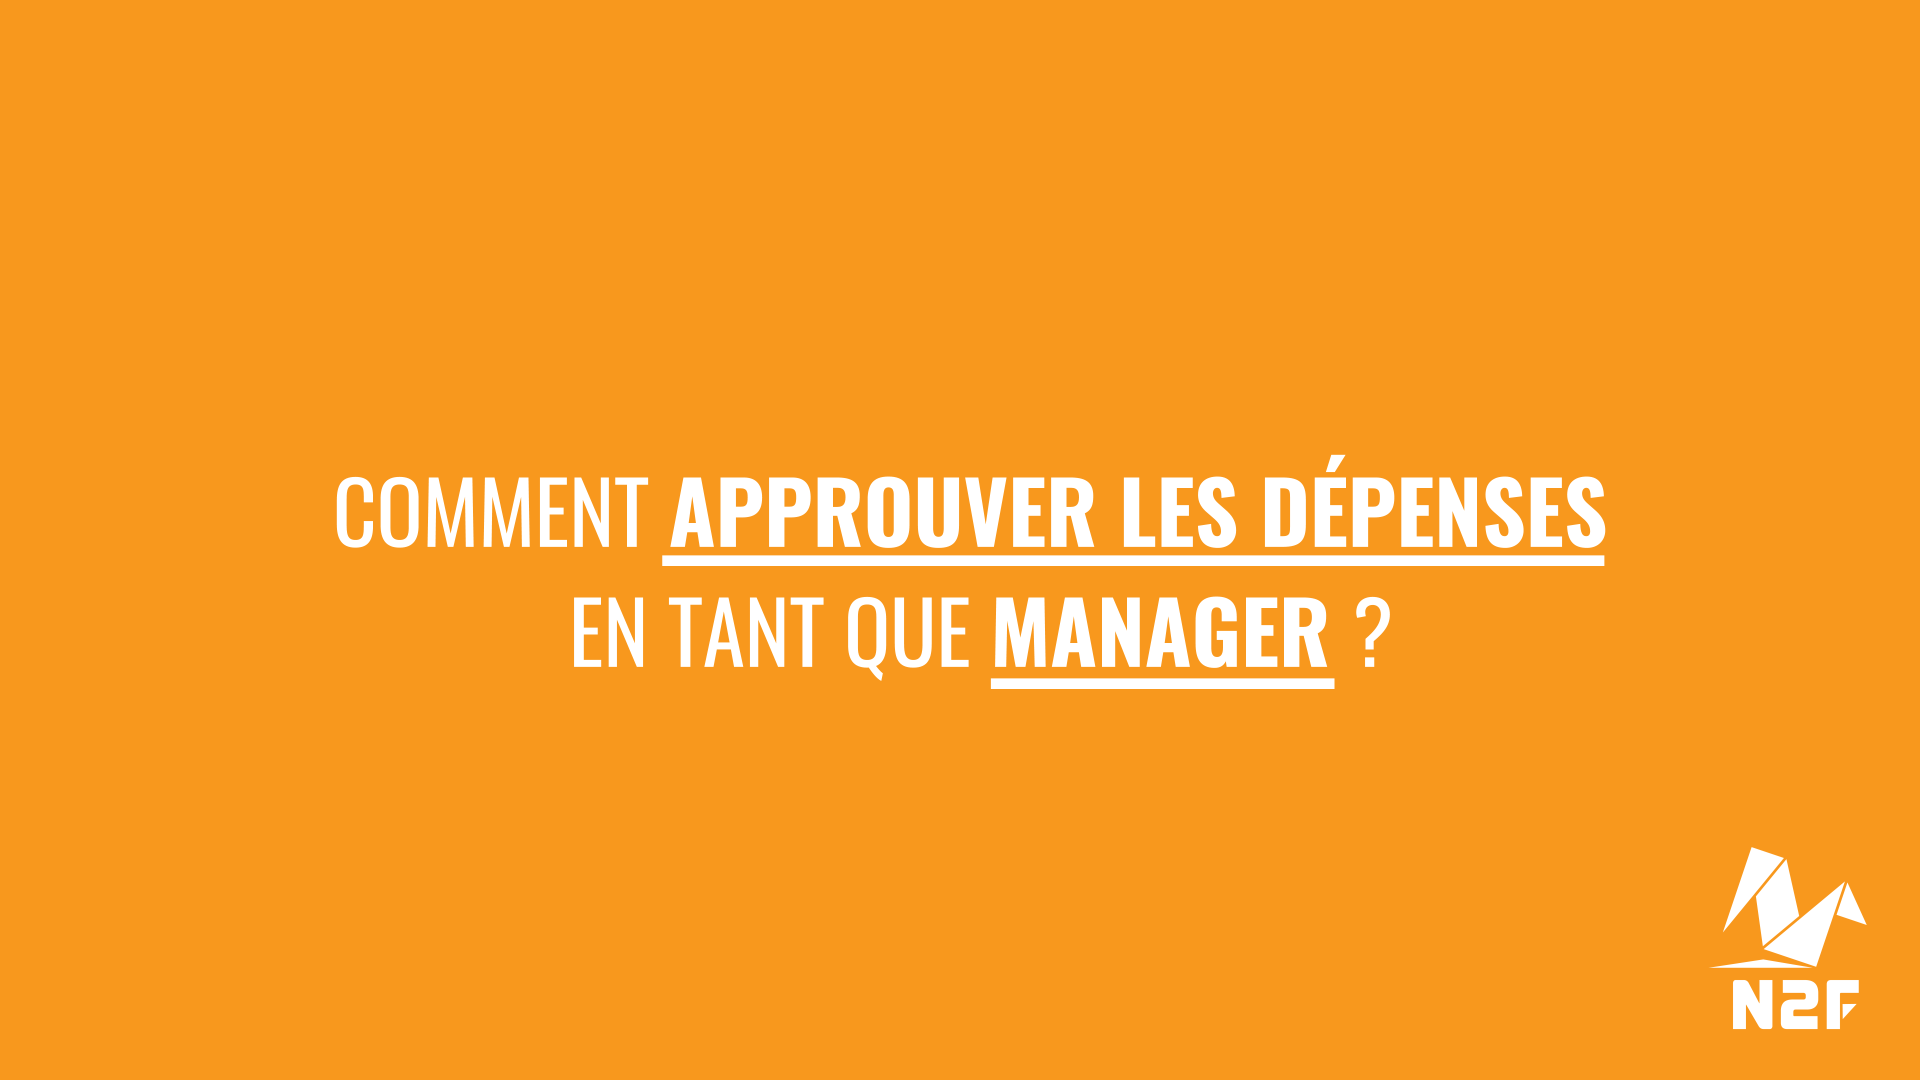 4 comment_approuver_depenses_manager